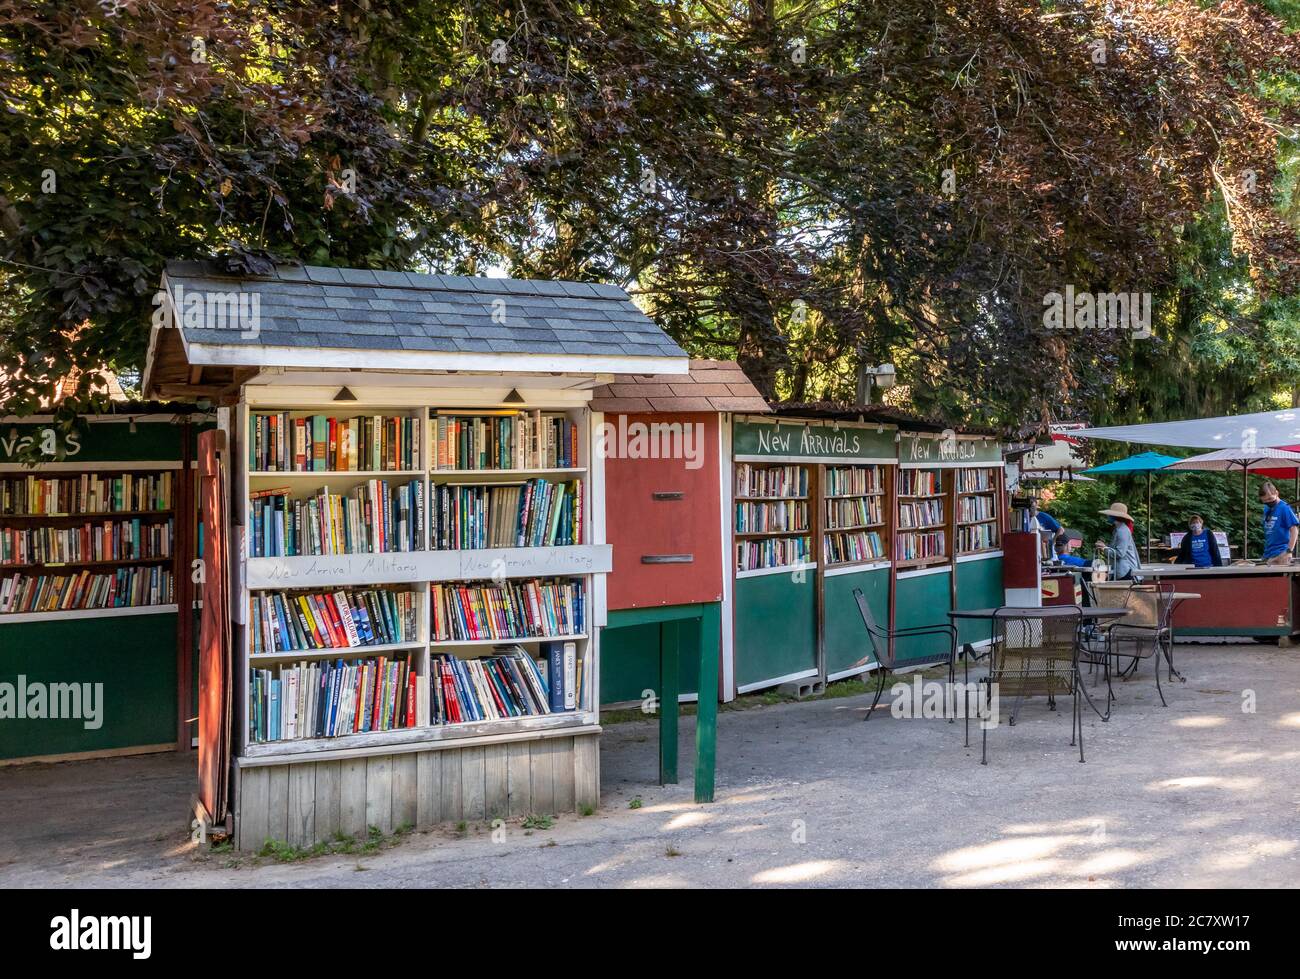 Niantic Connecticut - June 17, 2020: Book Barn in Niantic Connecticut, beautiful outdoor used bookstore. People shopping for books. Stock Photo